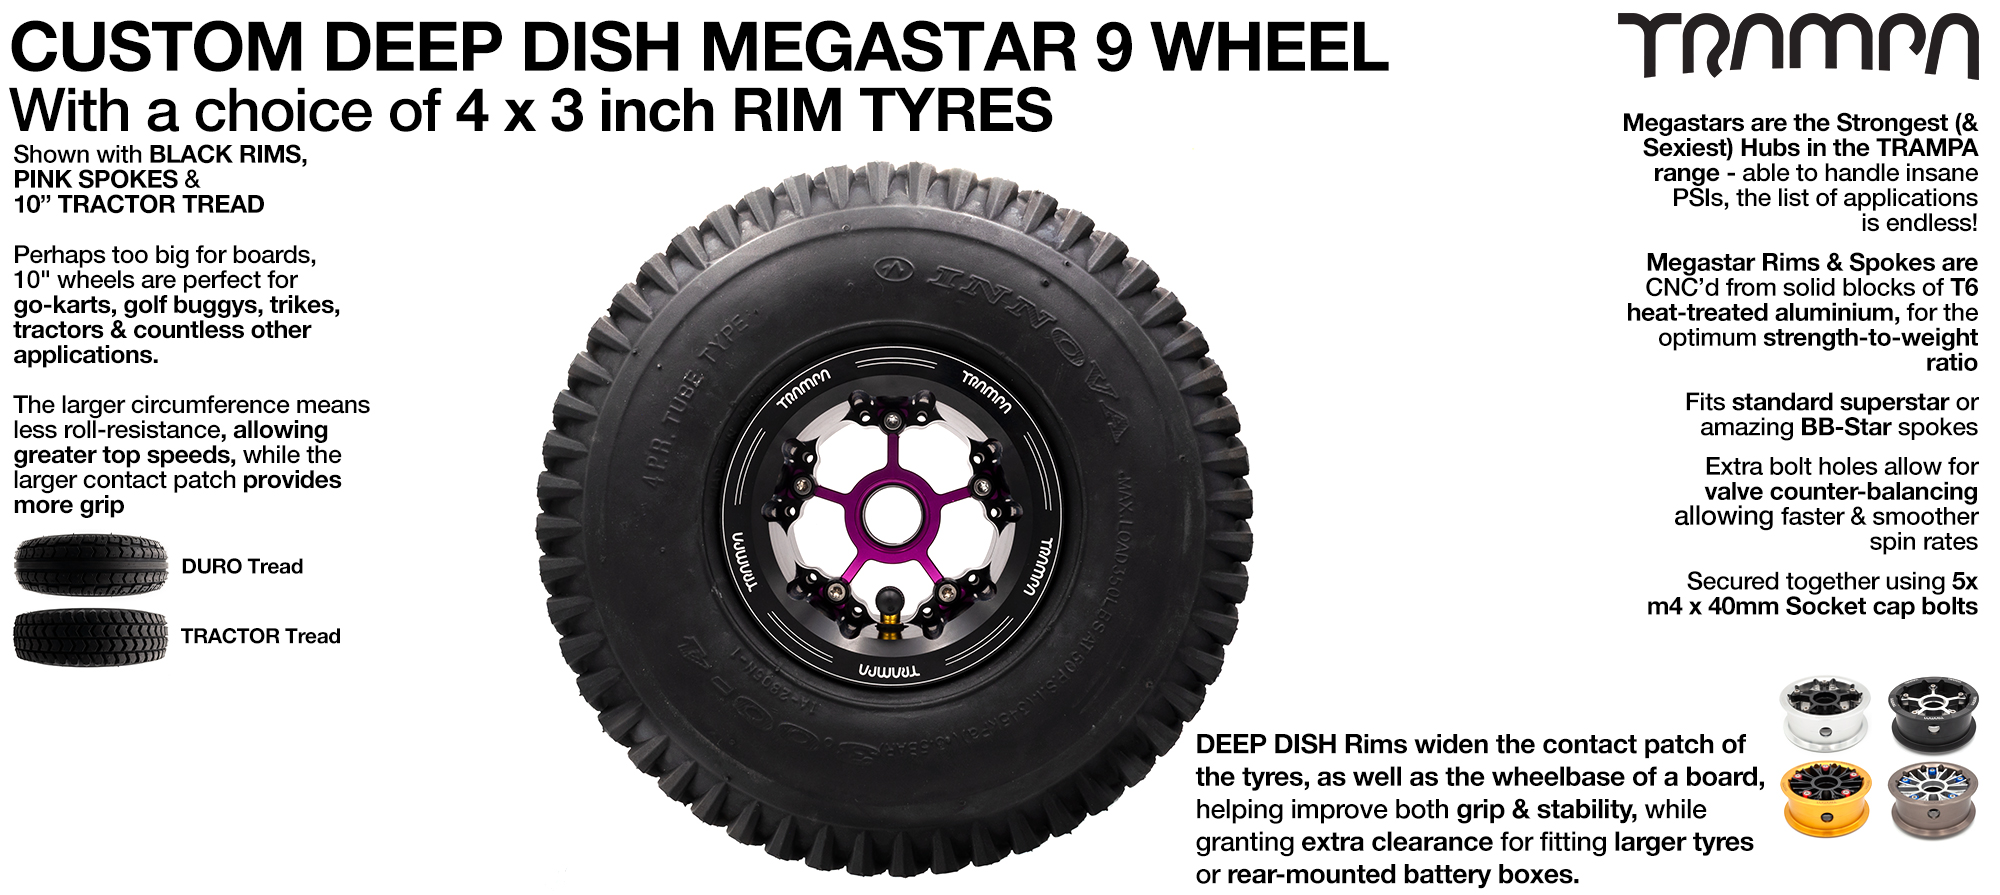 TRAMPA's DEEP-DISH MEGASTAR 9 wheels are of your dreams!! With or without BBStar spokes any combination possible & fits up to 10 inch tyres too!